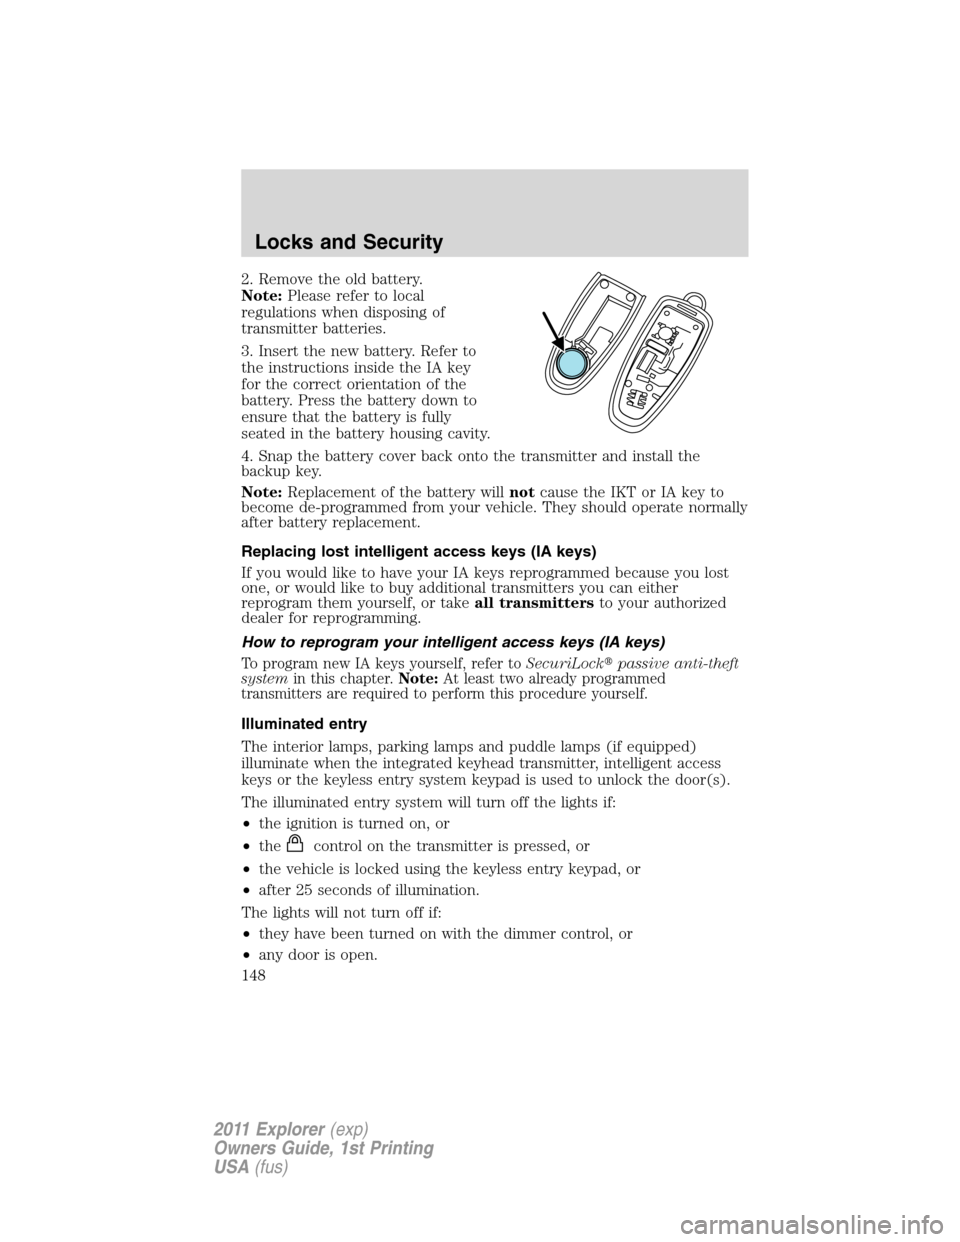 FORD EXPLORER 2011 5.G Owners Manual 2. Remove the old battery.
Note:Please refer to local
regulations when disposing of
transmitter batteries.
3. Insert the new battery. Refer to
the instructions inside the IA key
for the correct orient